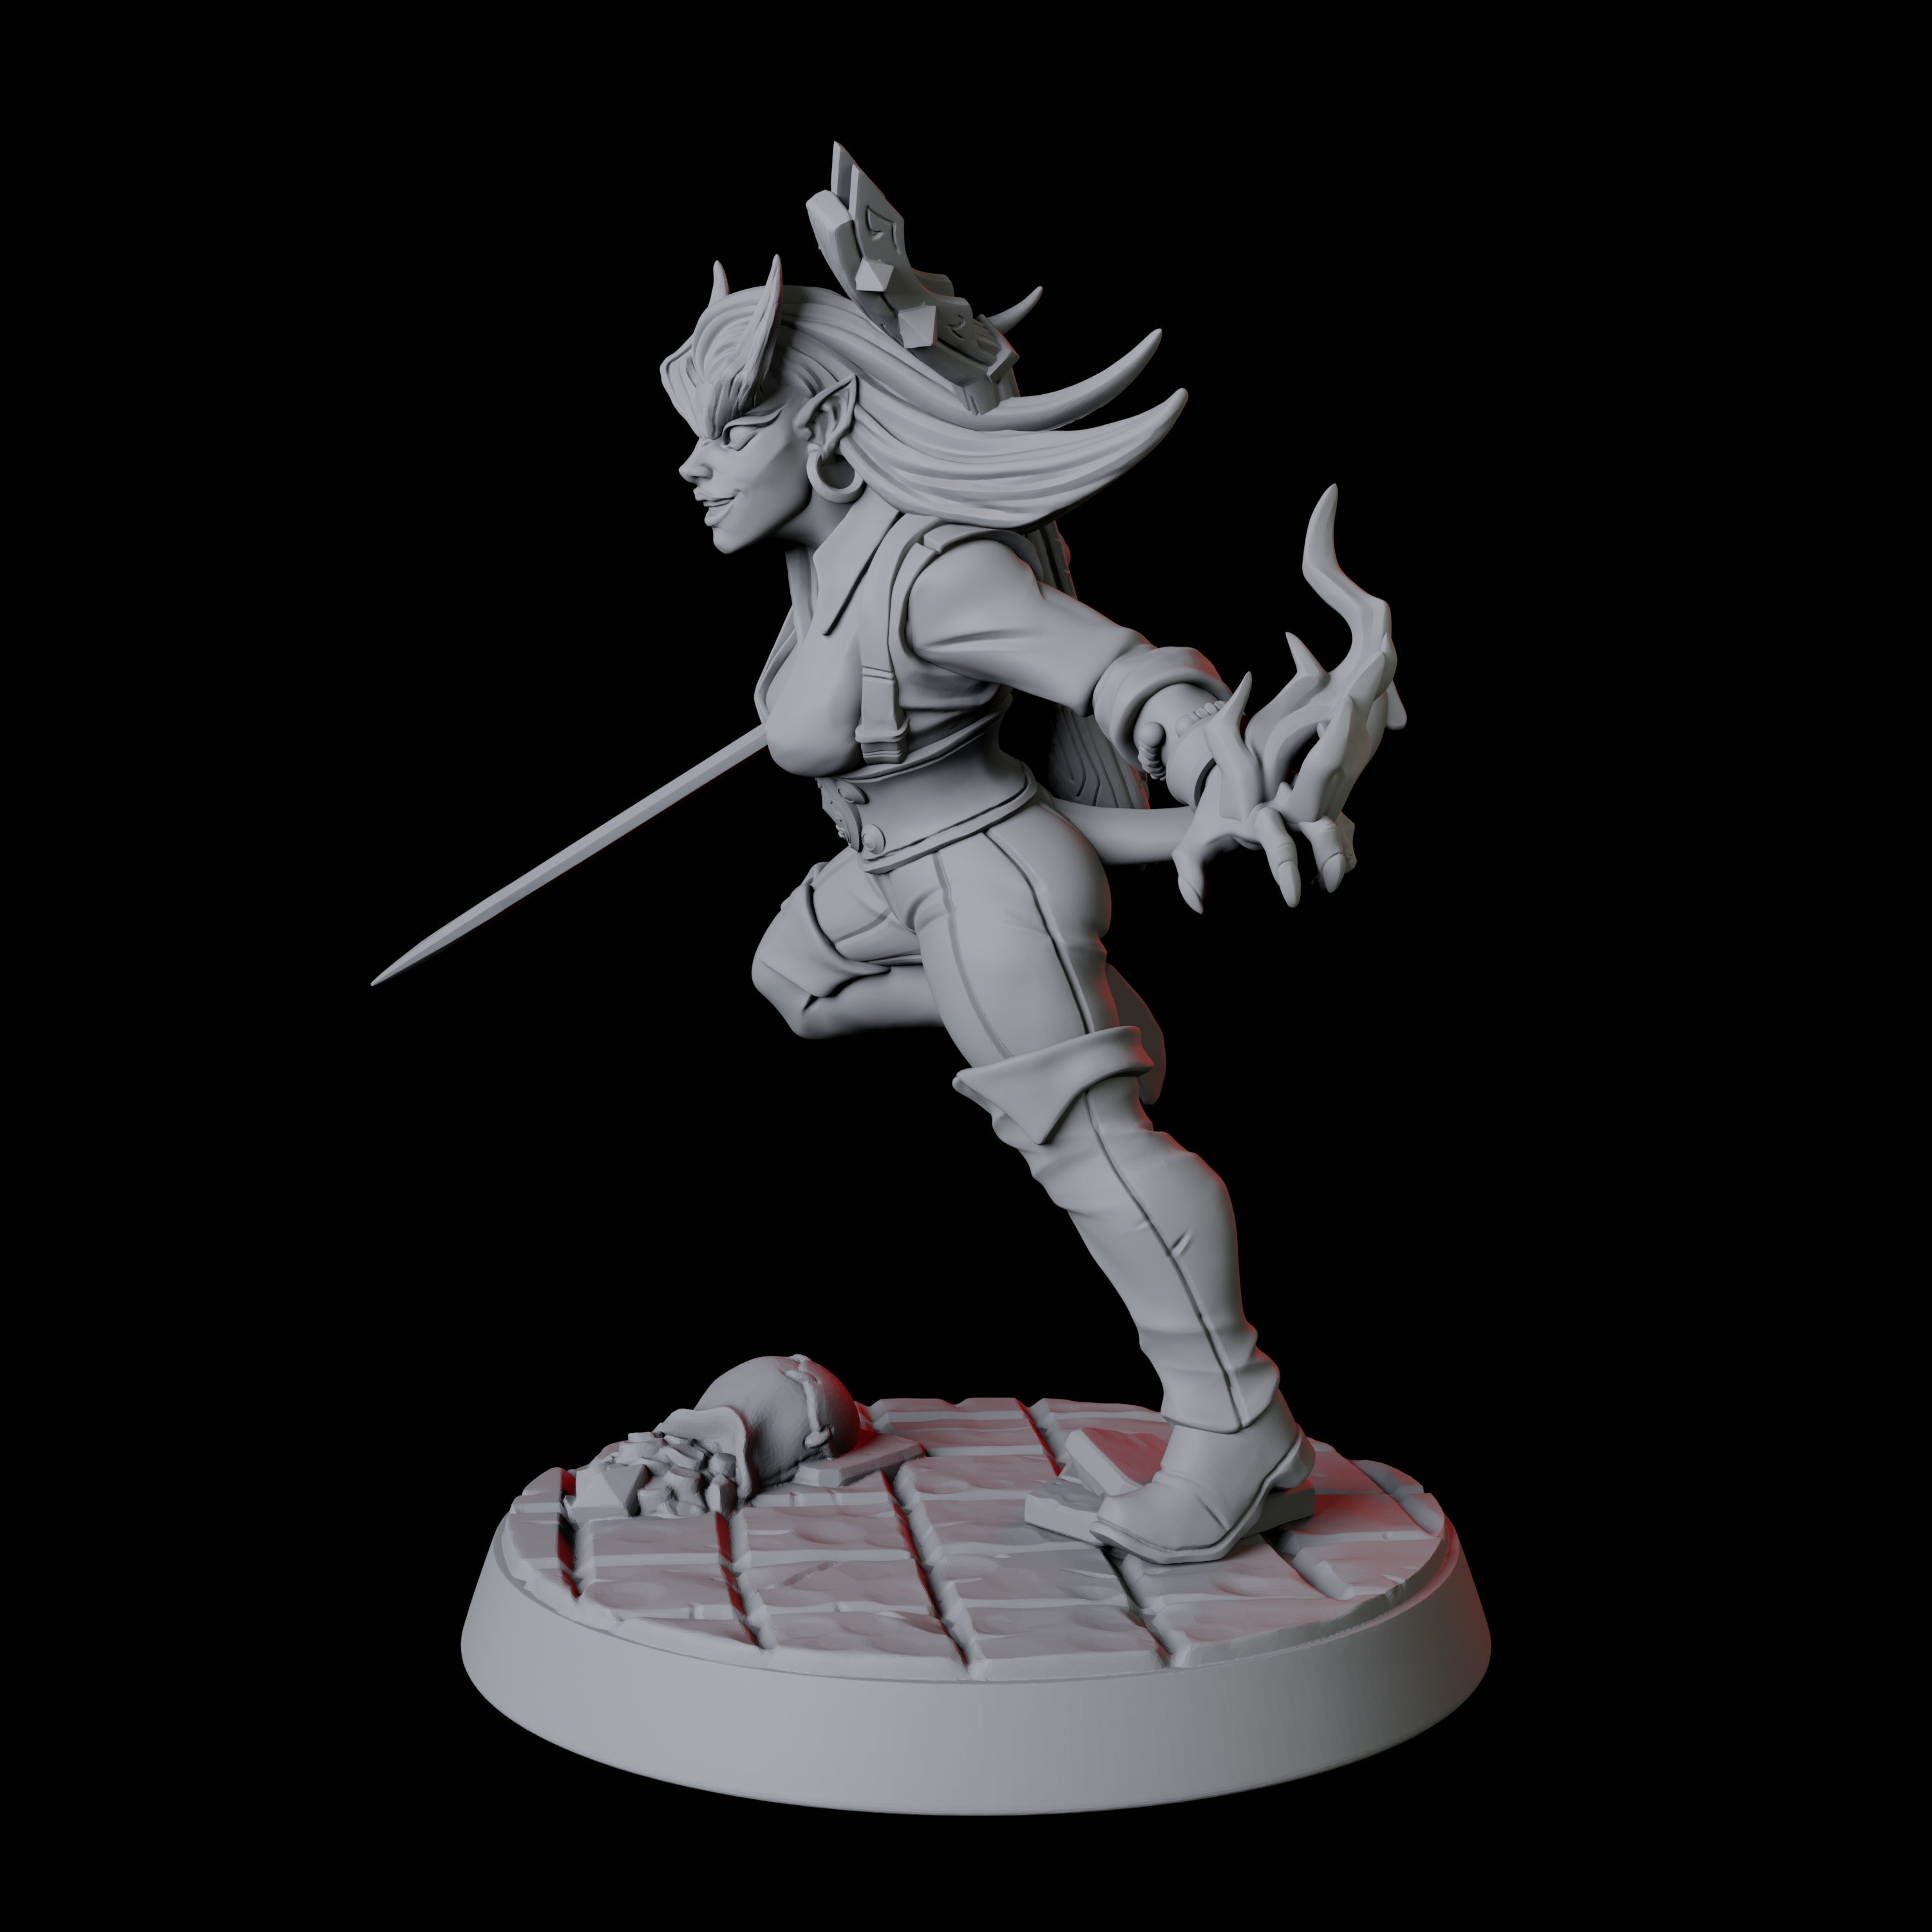 Tiefling Bard D Miniature for Dungeons and Dragons, Pathfinder or other TTRPGs